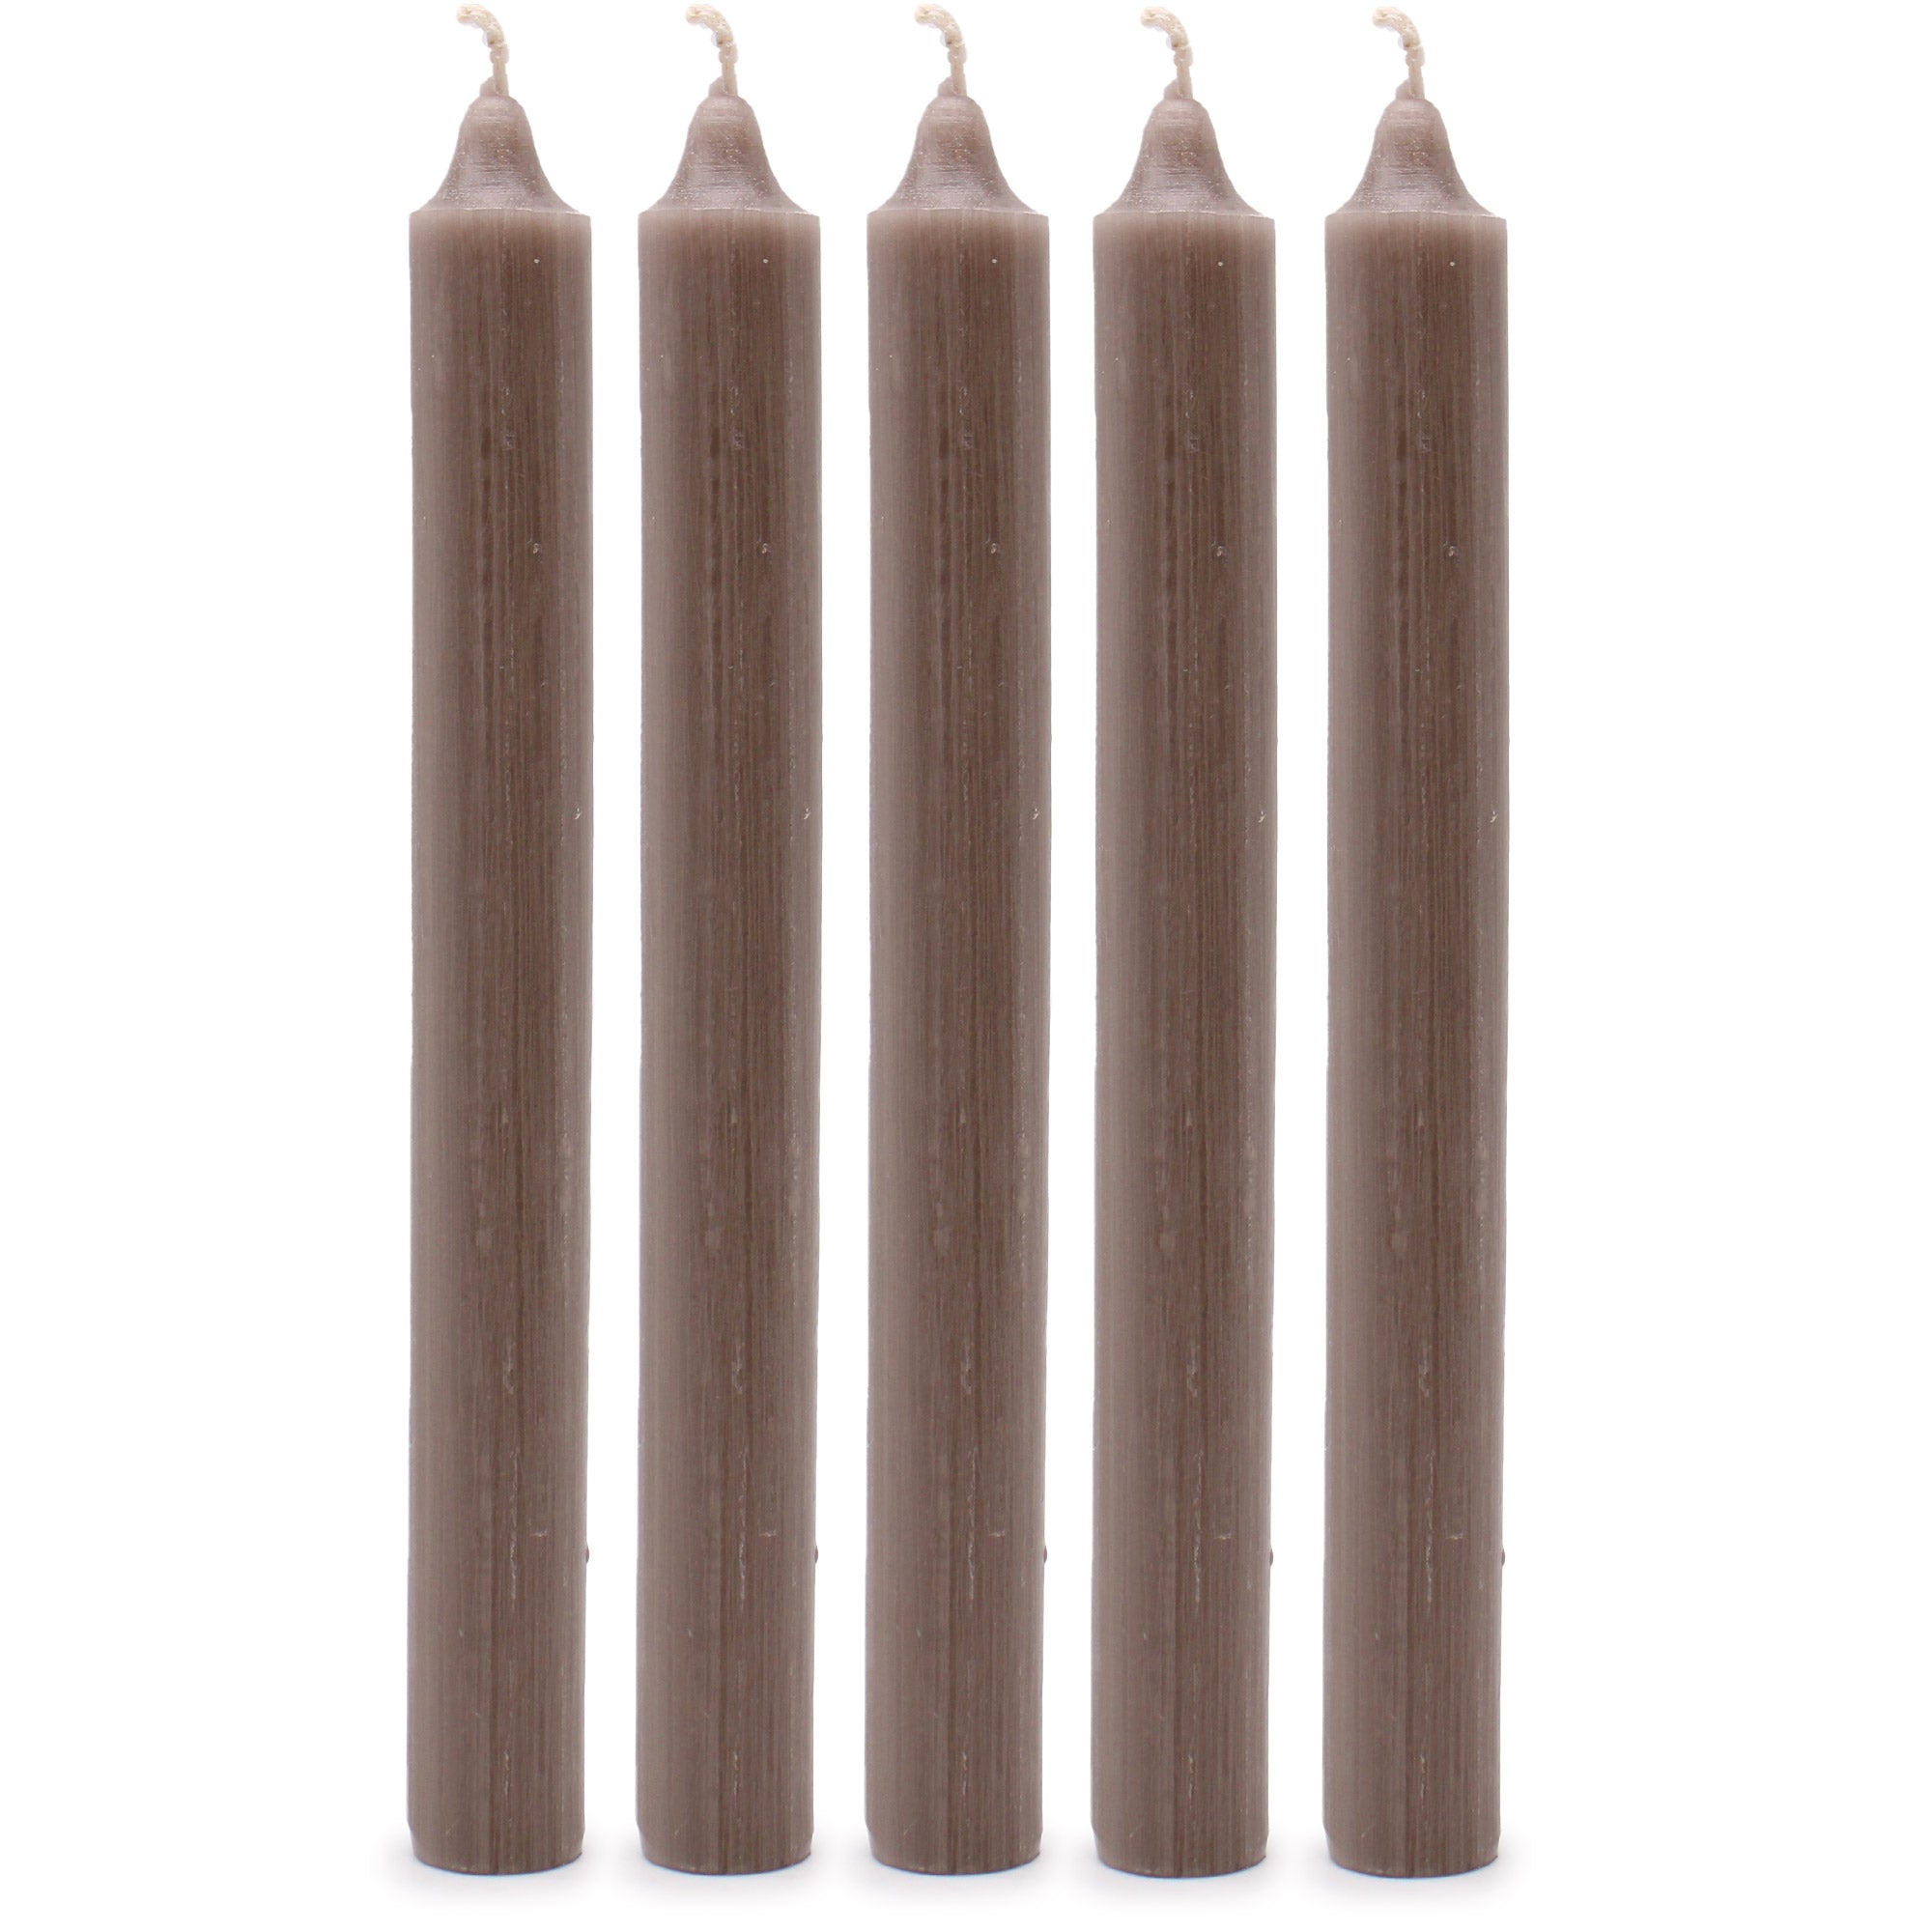 View Solid Colour Dinner Candles Rustic Taupe Pack of 5 information